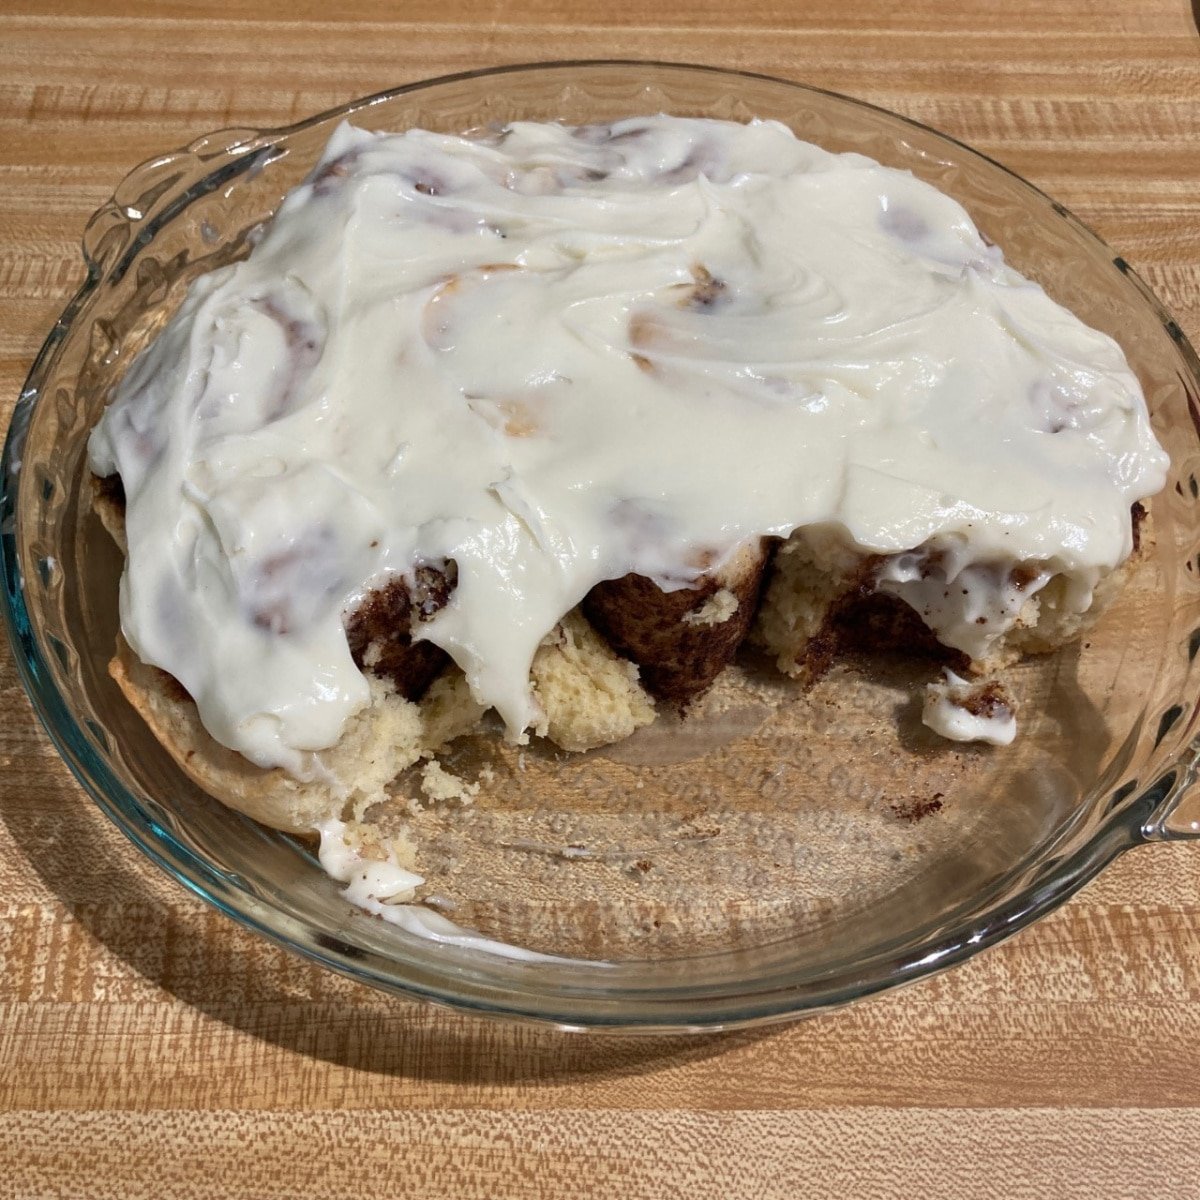 Winner's photo of no yeast cinnamon rolls in a pie dish with thick icing on top